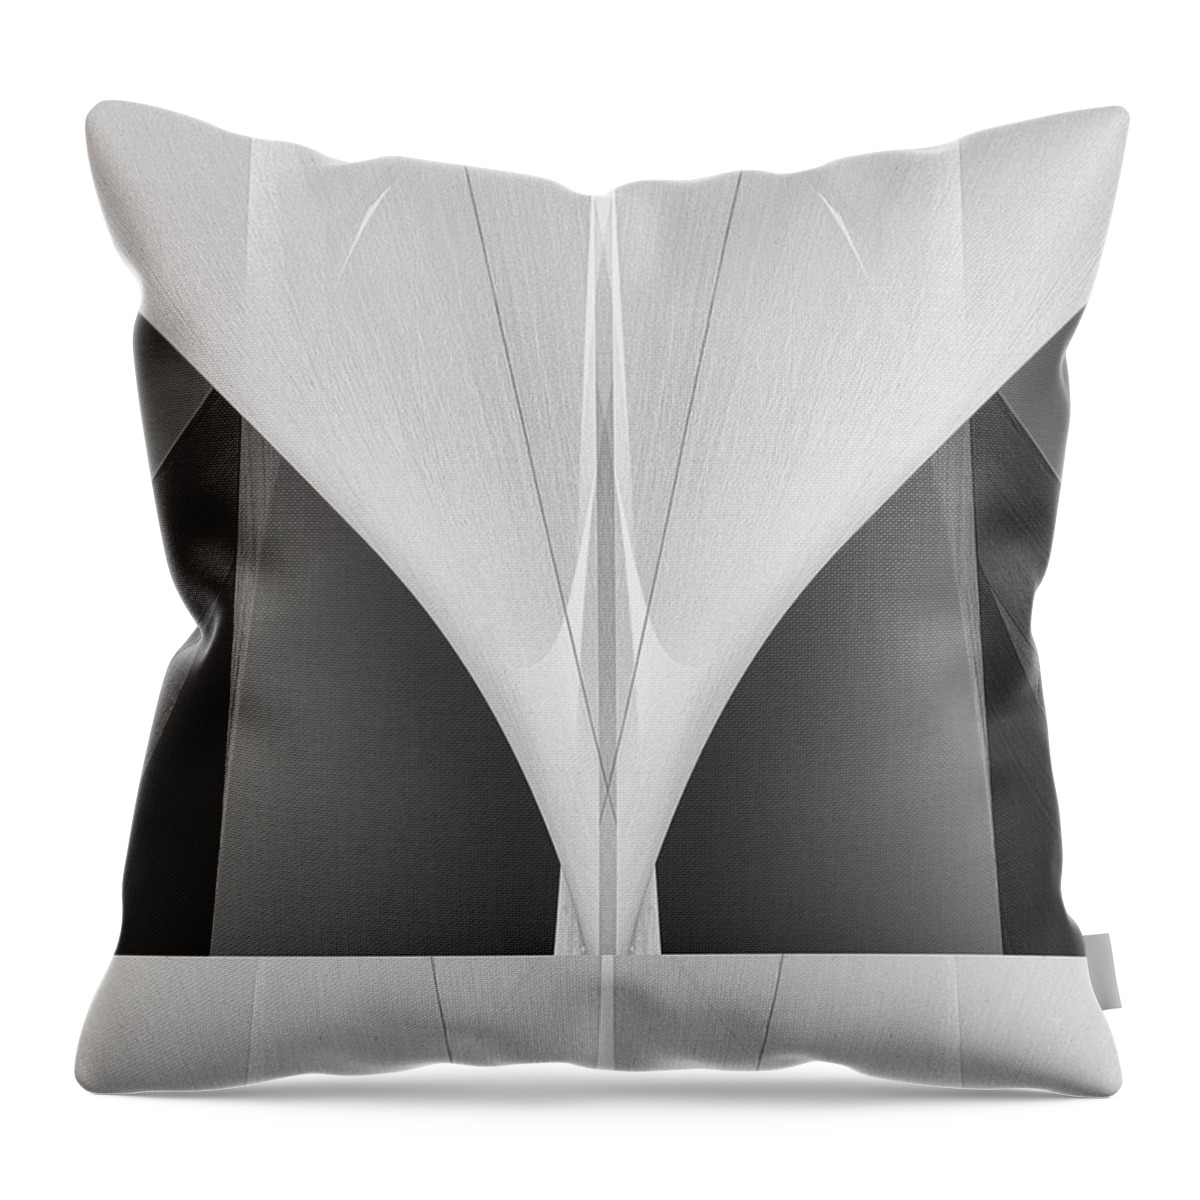 Black And White; Noir; Monochrome; Abstract; Design; Sails; Boating; Nautical; Sailing; Sailcloth; Minimal; Minimalism; Bob Orsillo; Copyright Bob Orsillo All Rights Reserved; Orsillo; Photograph; Photography Throw Pillow featuring the photograph Abstract Sailcloth 1 by Bob Orsillo